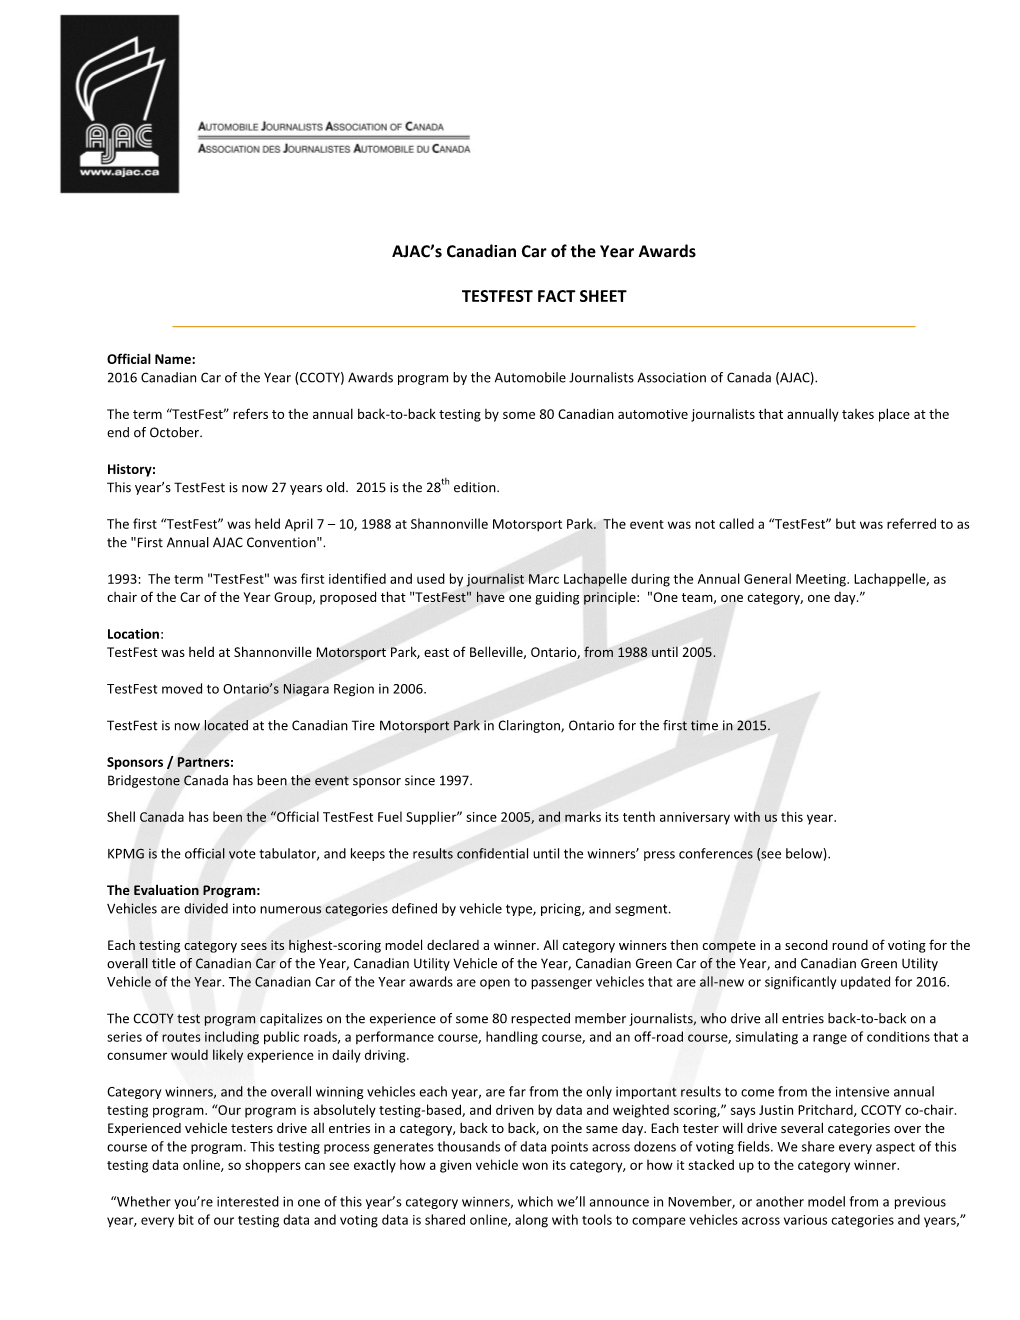 AJAC's Canadian Car of the Year Awards TESTFEST FACT SHEET